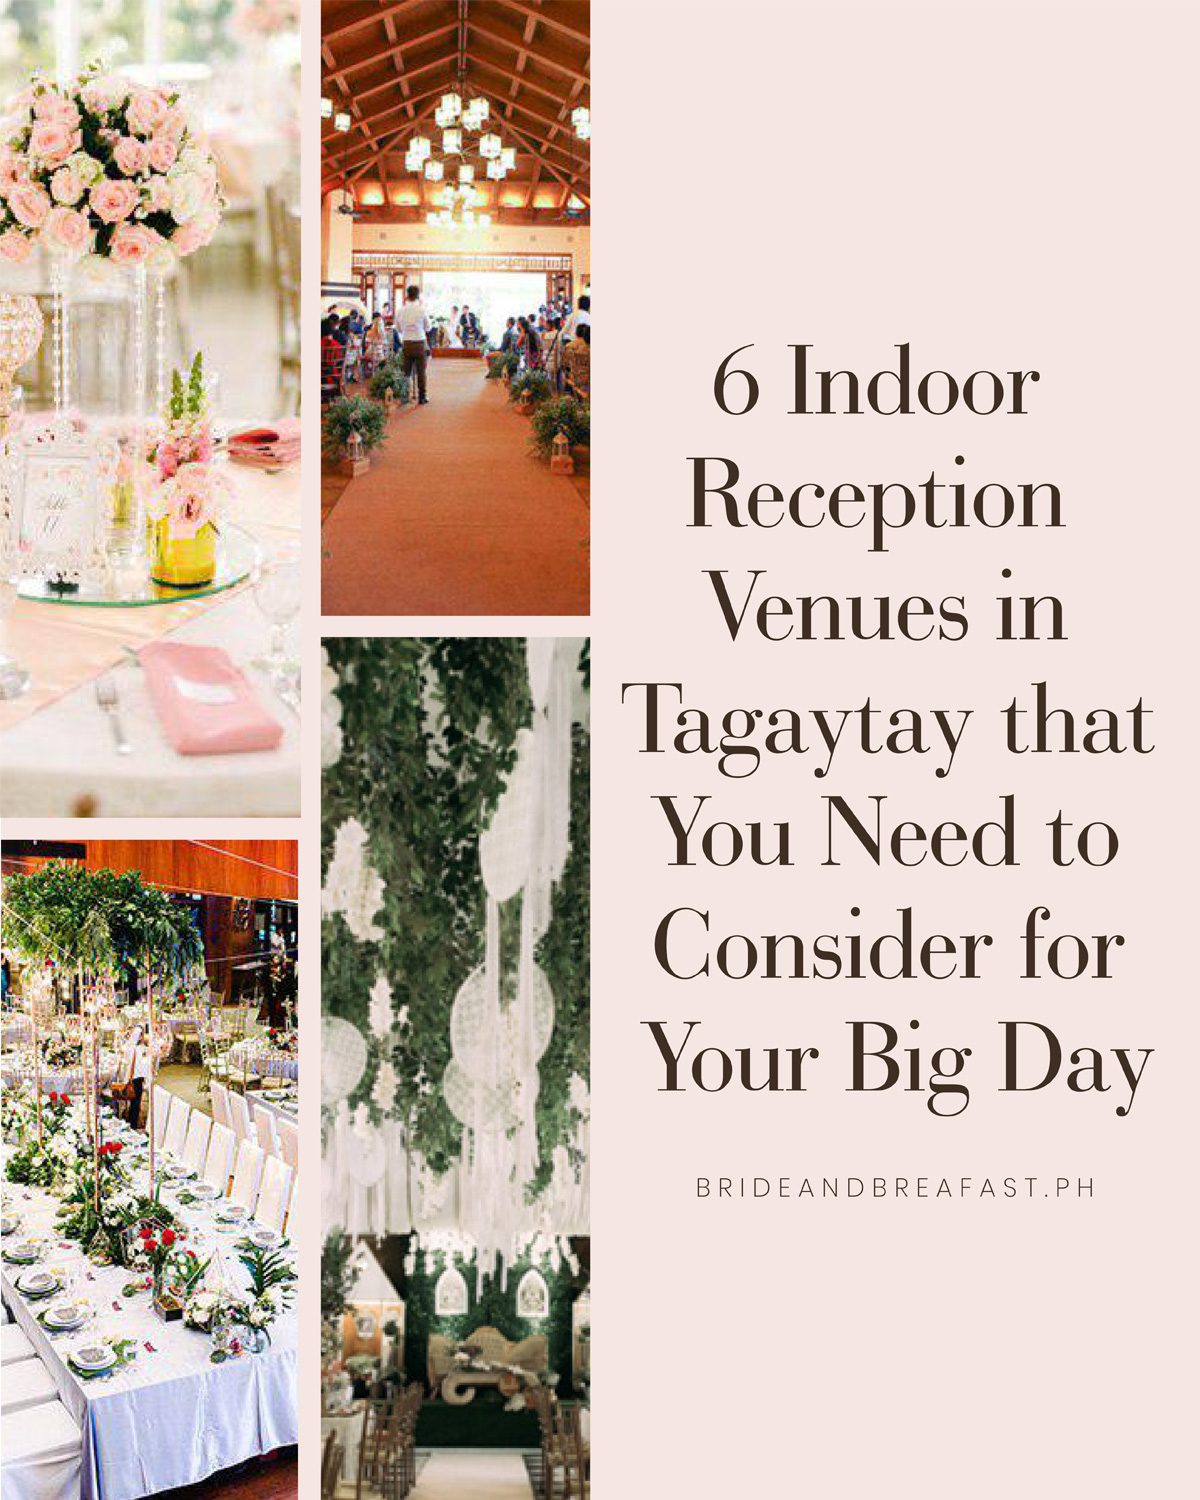 6 Indoor Reception Venues in Tagaytay that You Need to Consider for Your Big day